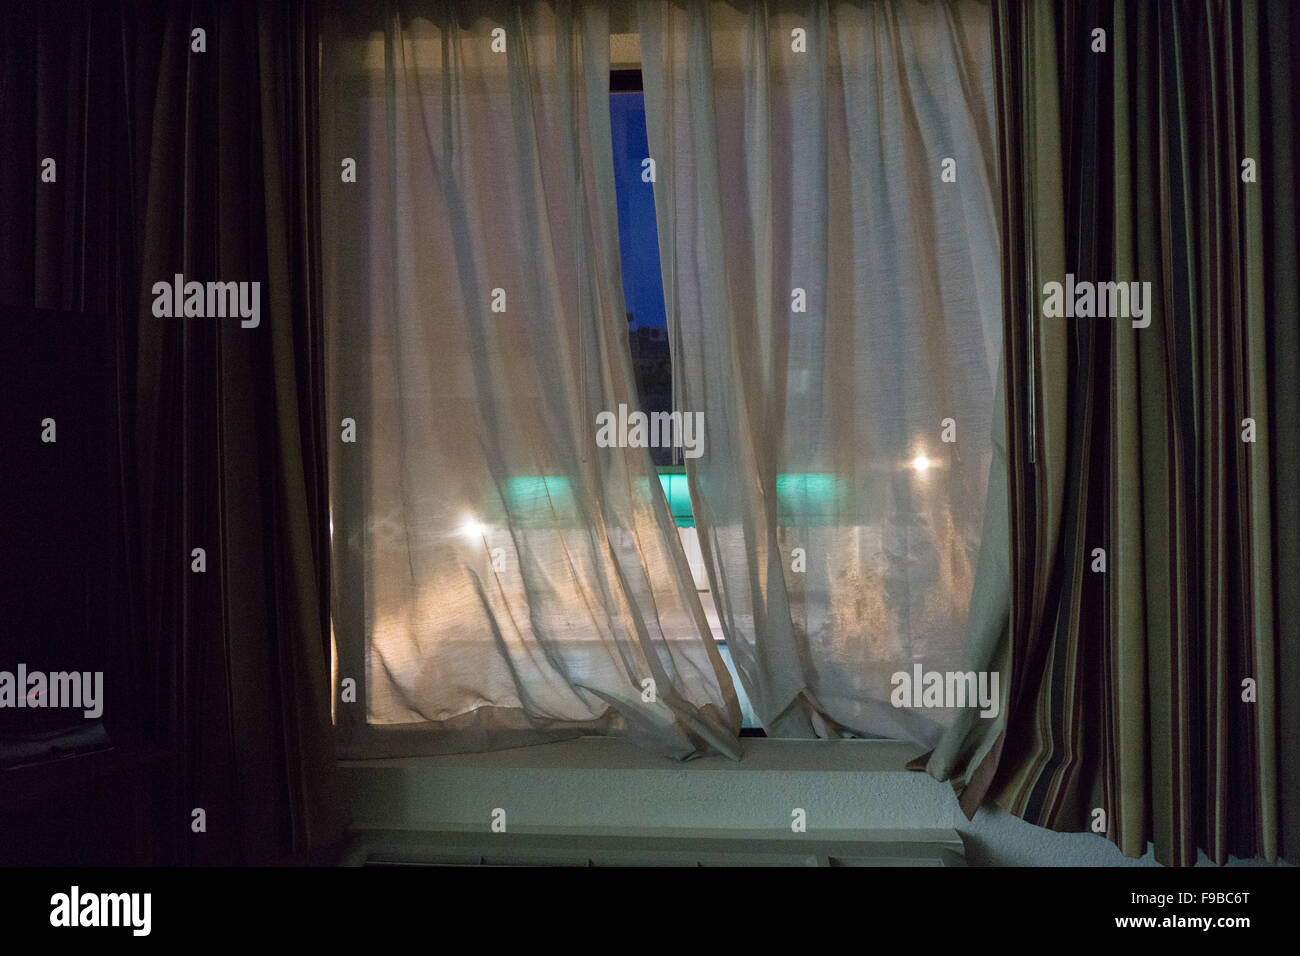 sheer curtains in a motel room at night Stock Photo